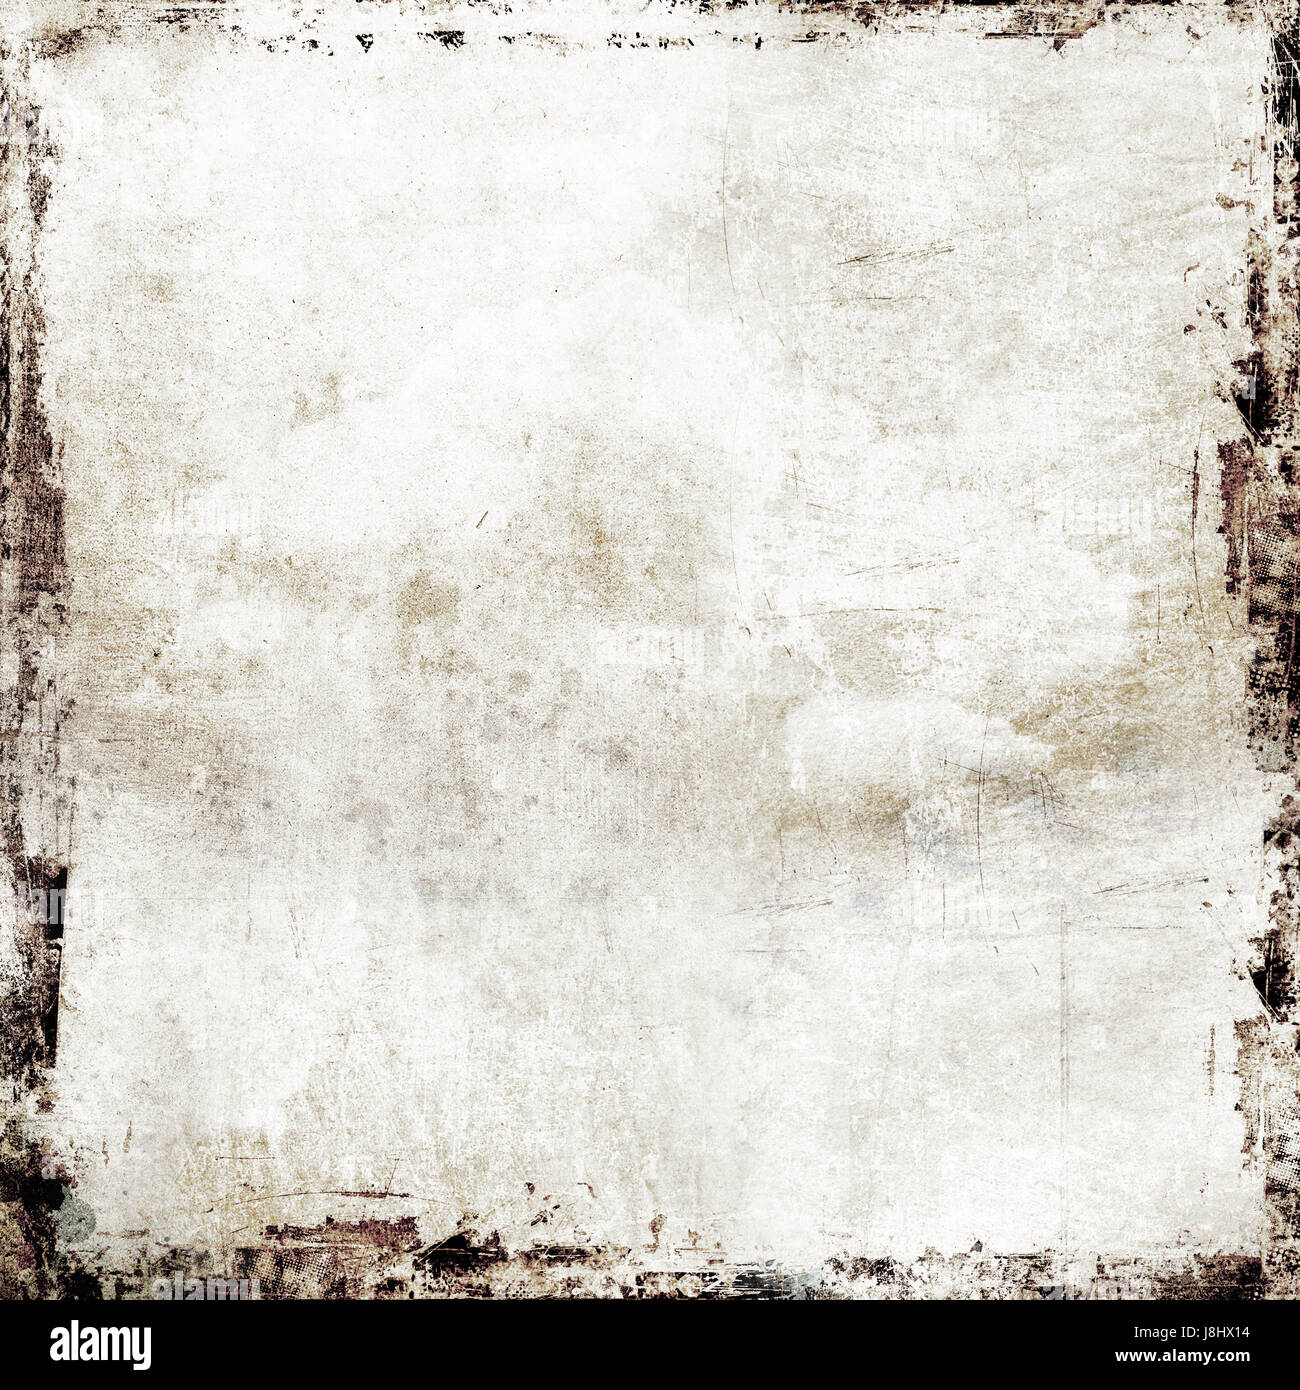 antique, wall, retro, faded, backdrop, background, old, stone, antique, Stock Photo